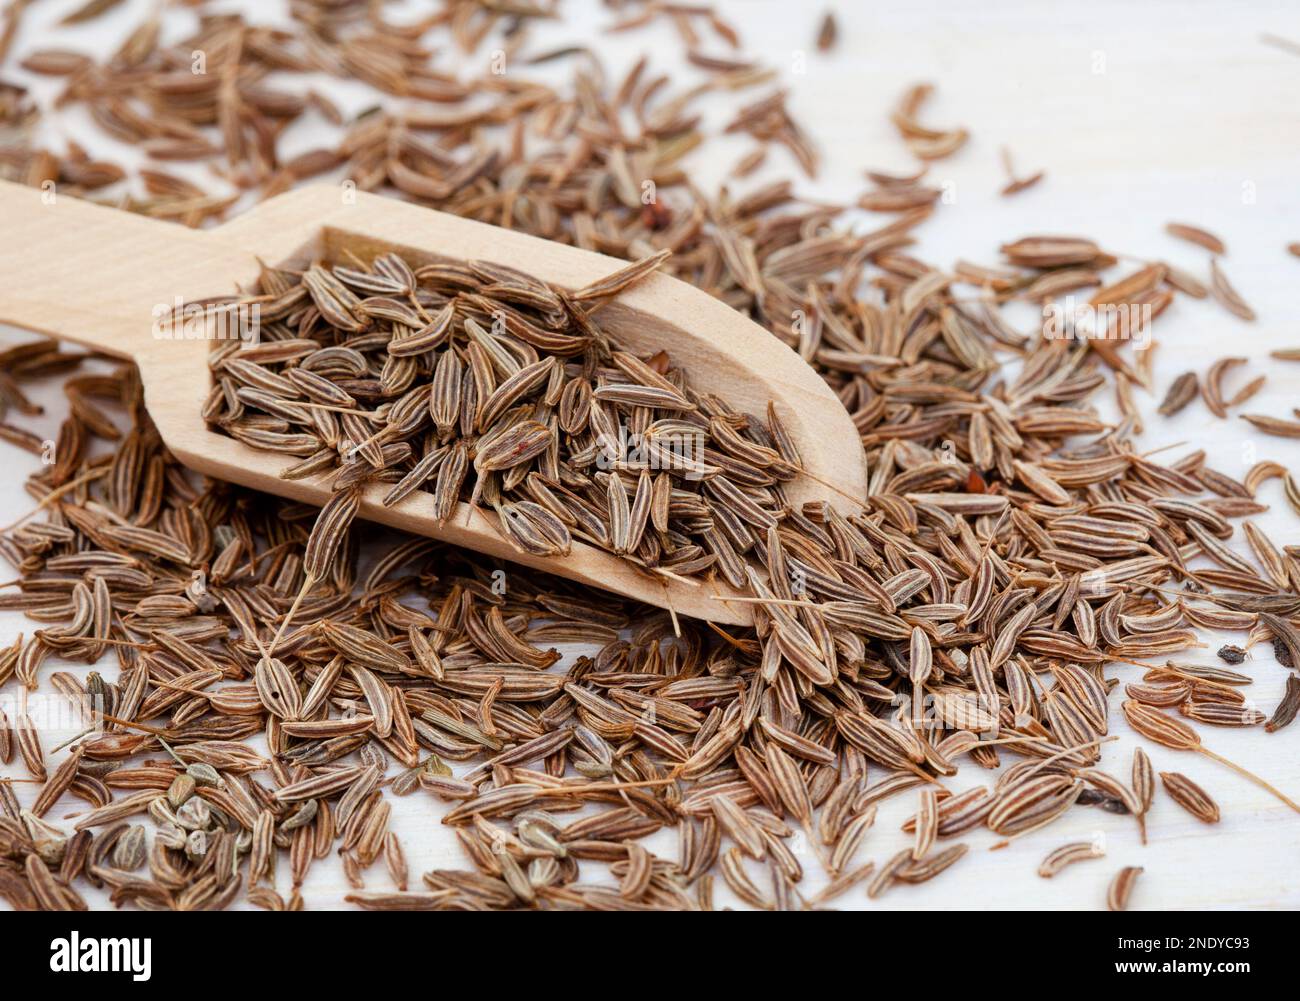 Caraway or Cumin seeds close up with selective focus in wooden scoop Stock Photo